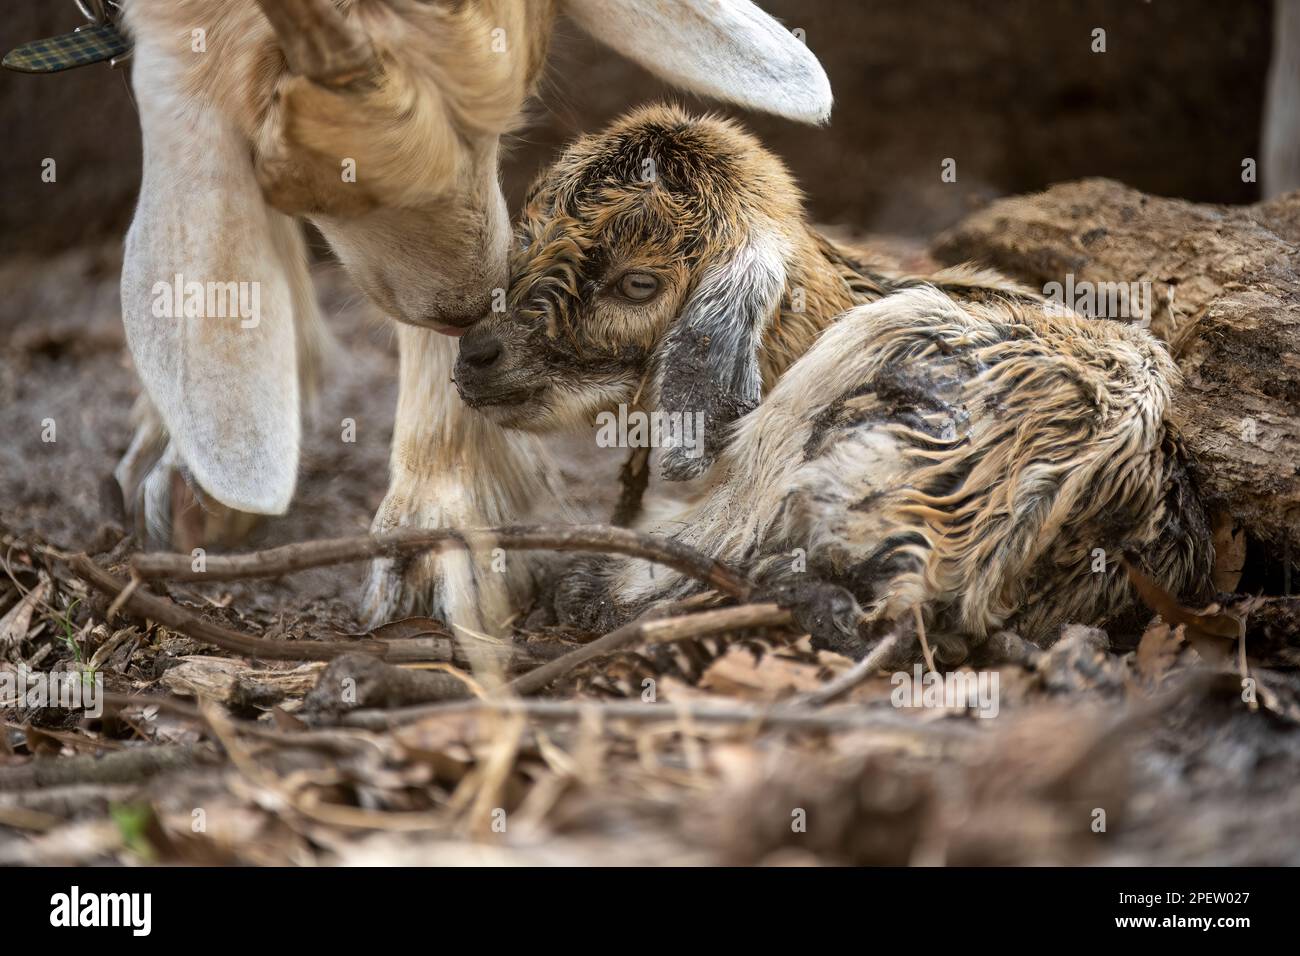 A newborn brown baby goat and its mother Stock Photo